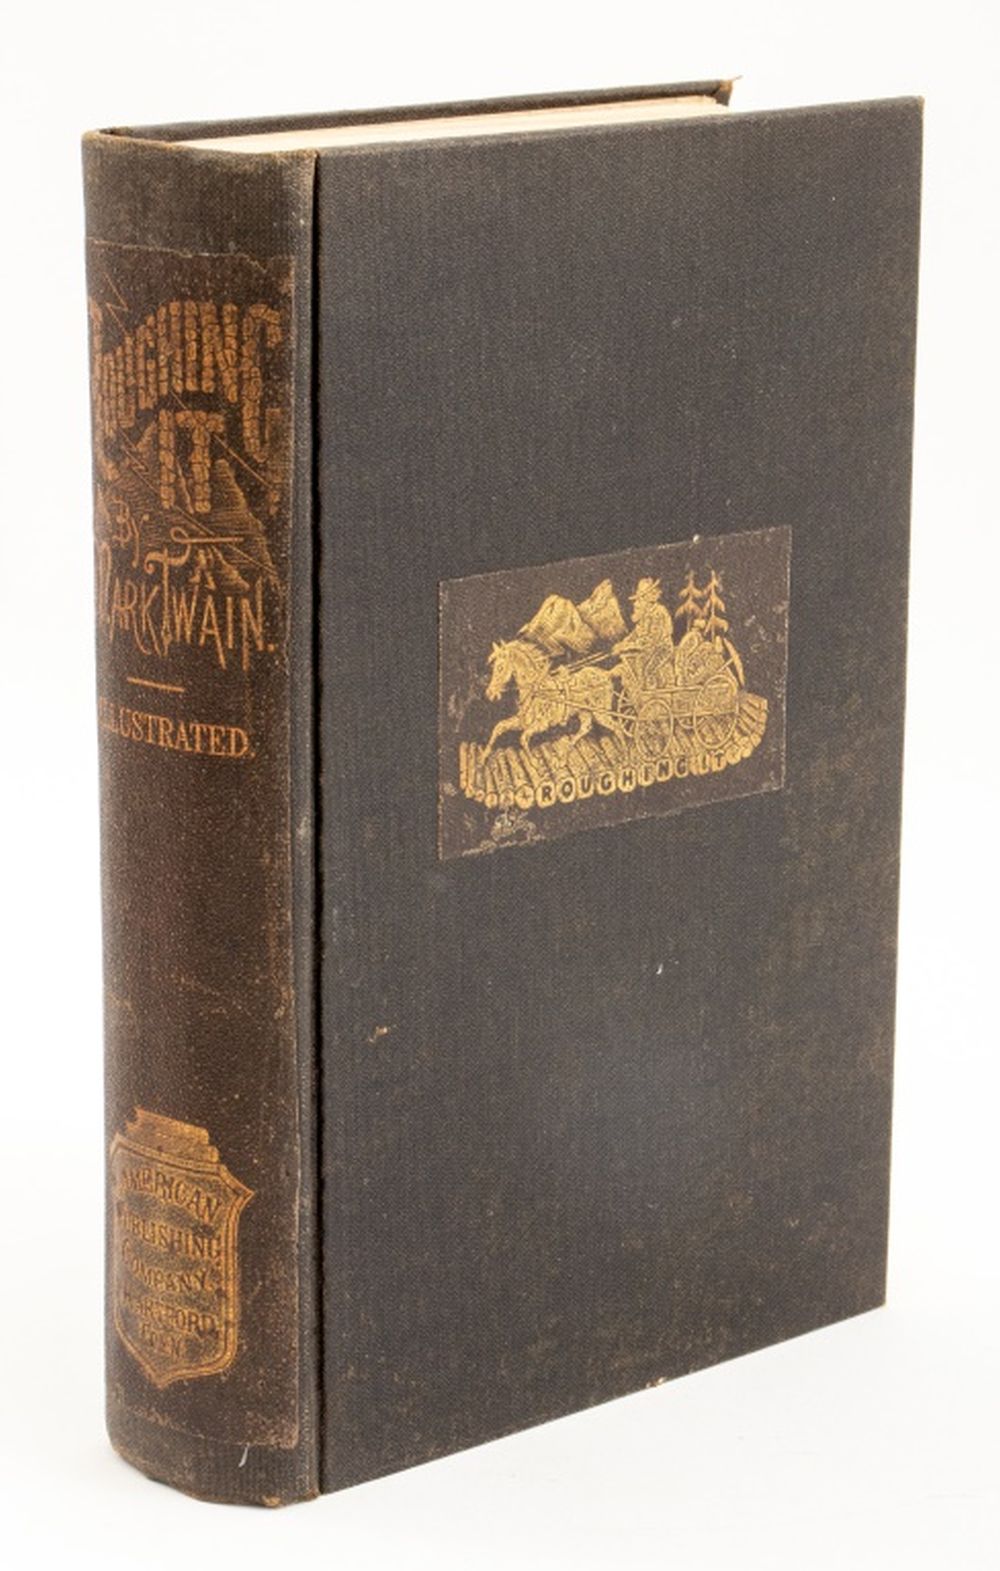 MARK TWAIN ROUGHING IT 1ST EDITION  2fc598